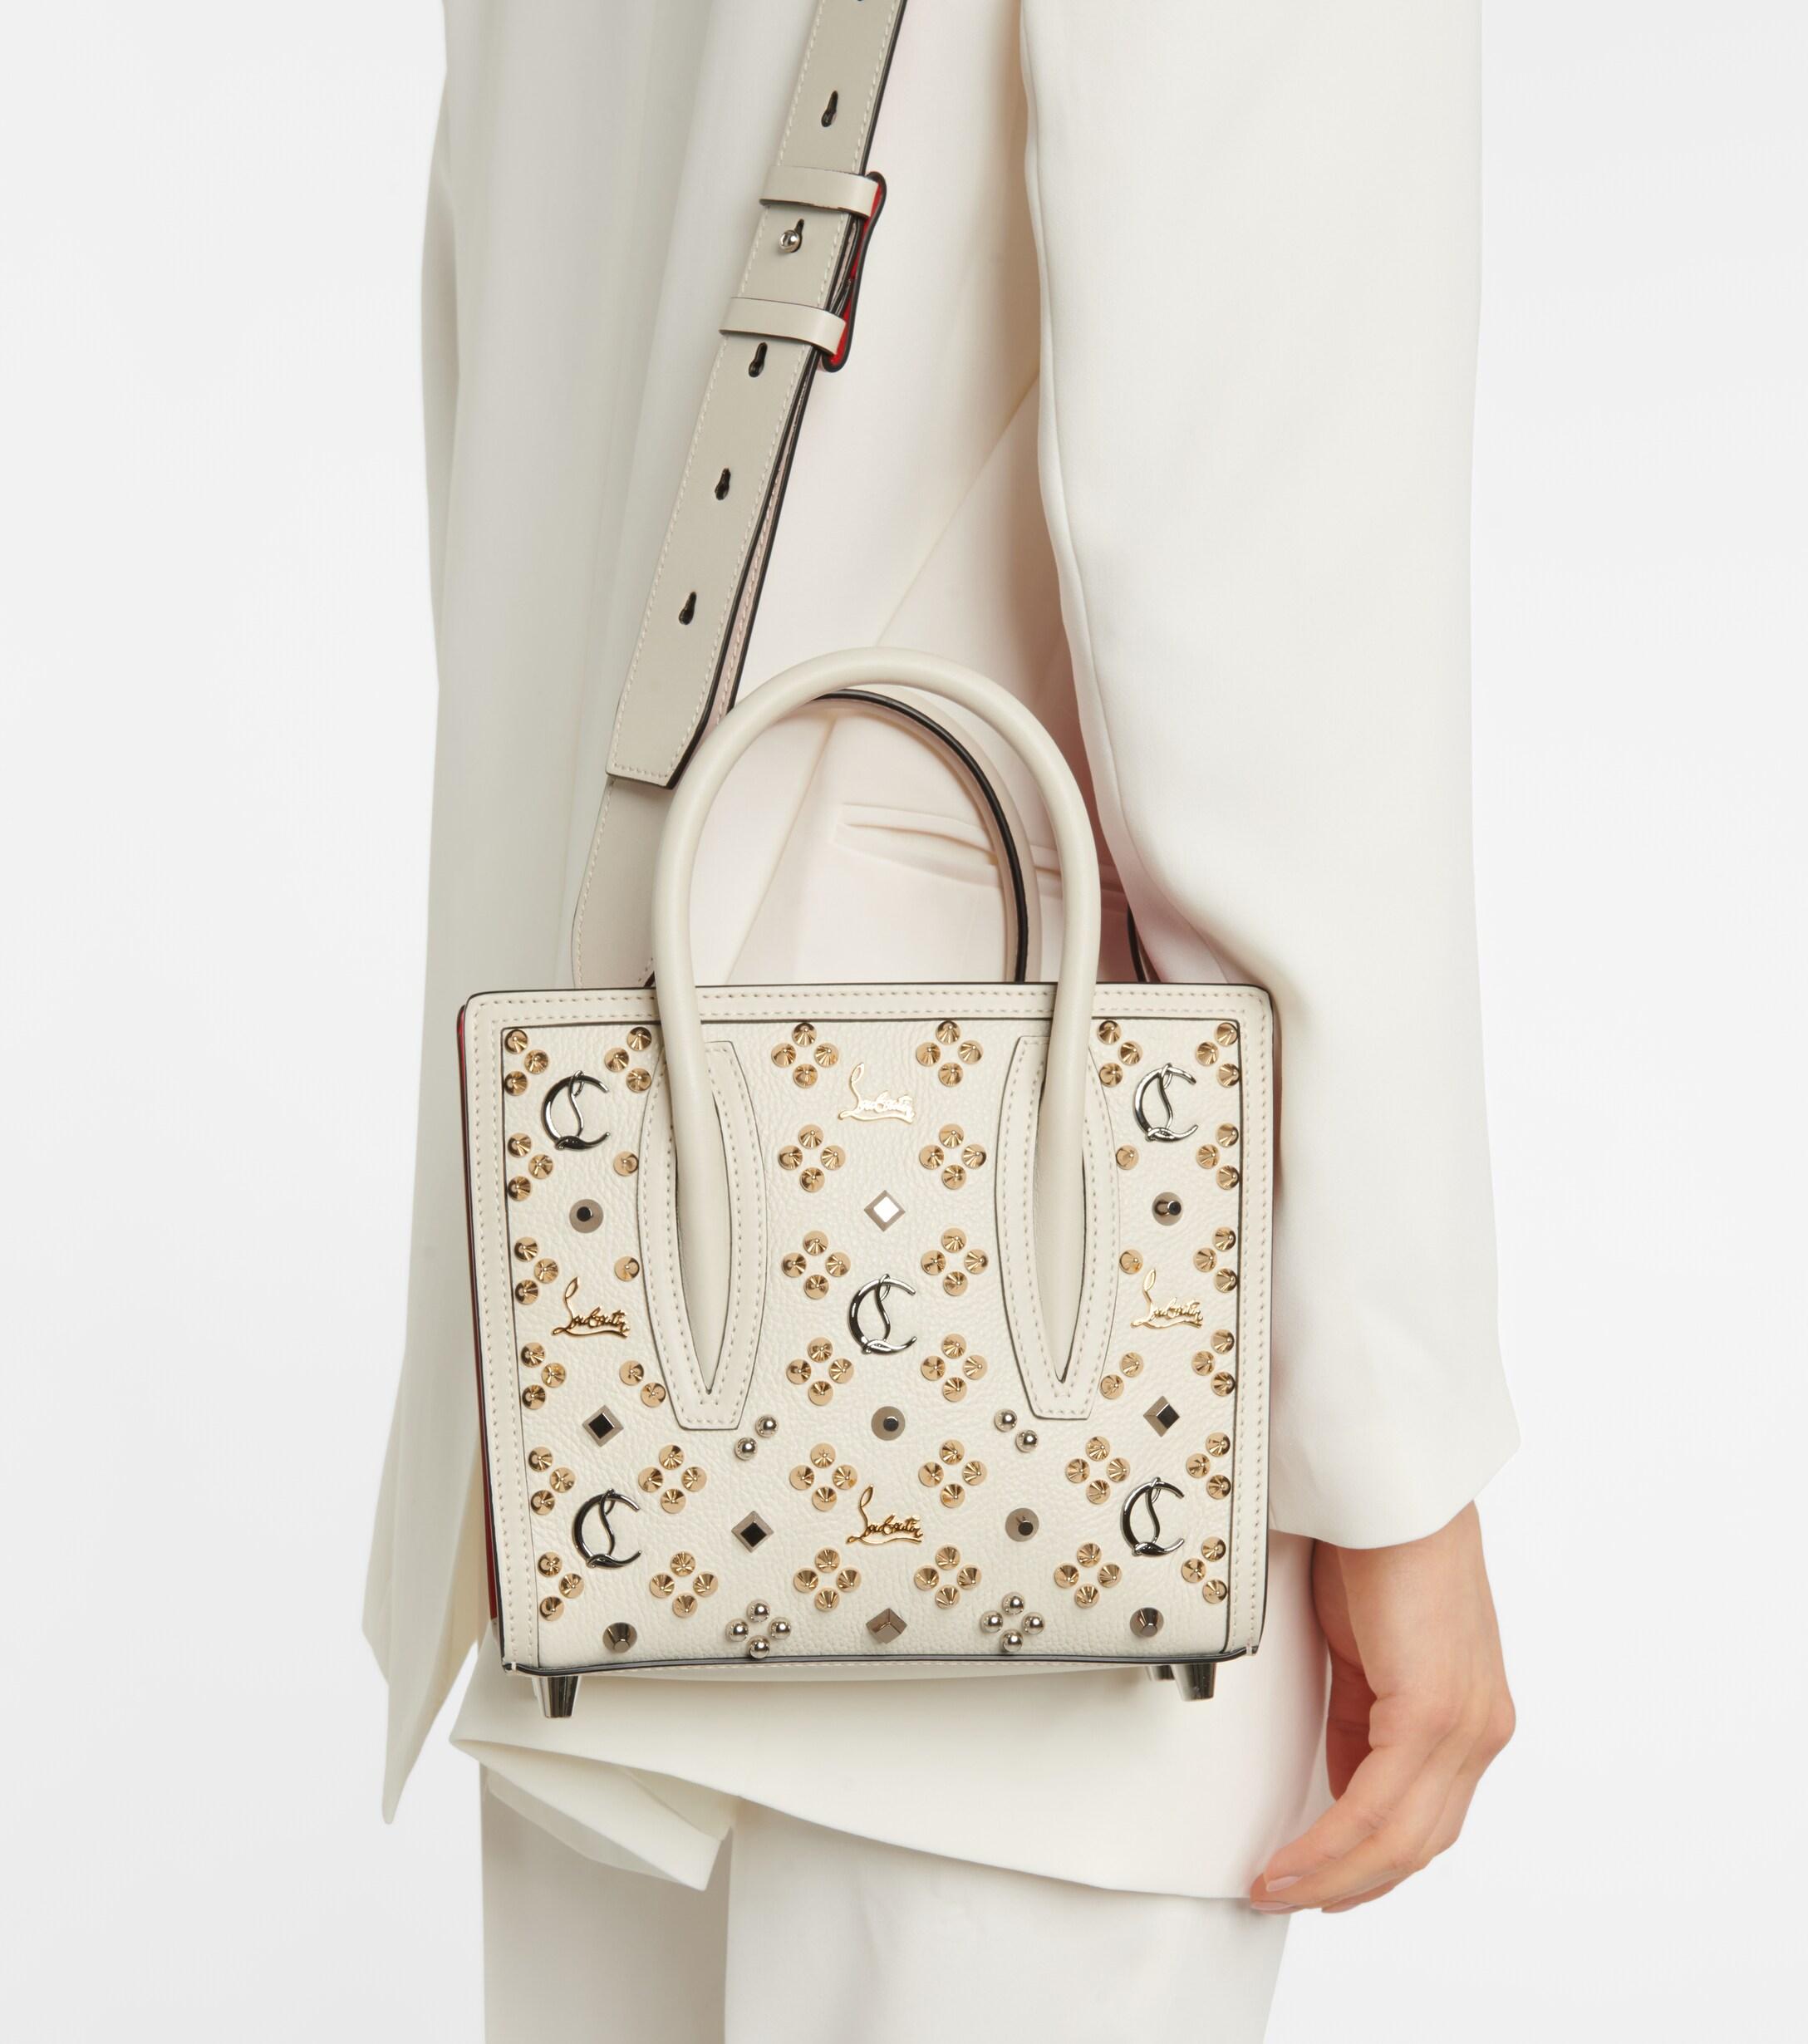 Christian Louboutin Paloma S Mini Embellished Leather Tote in 